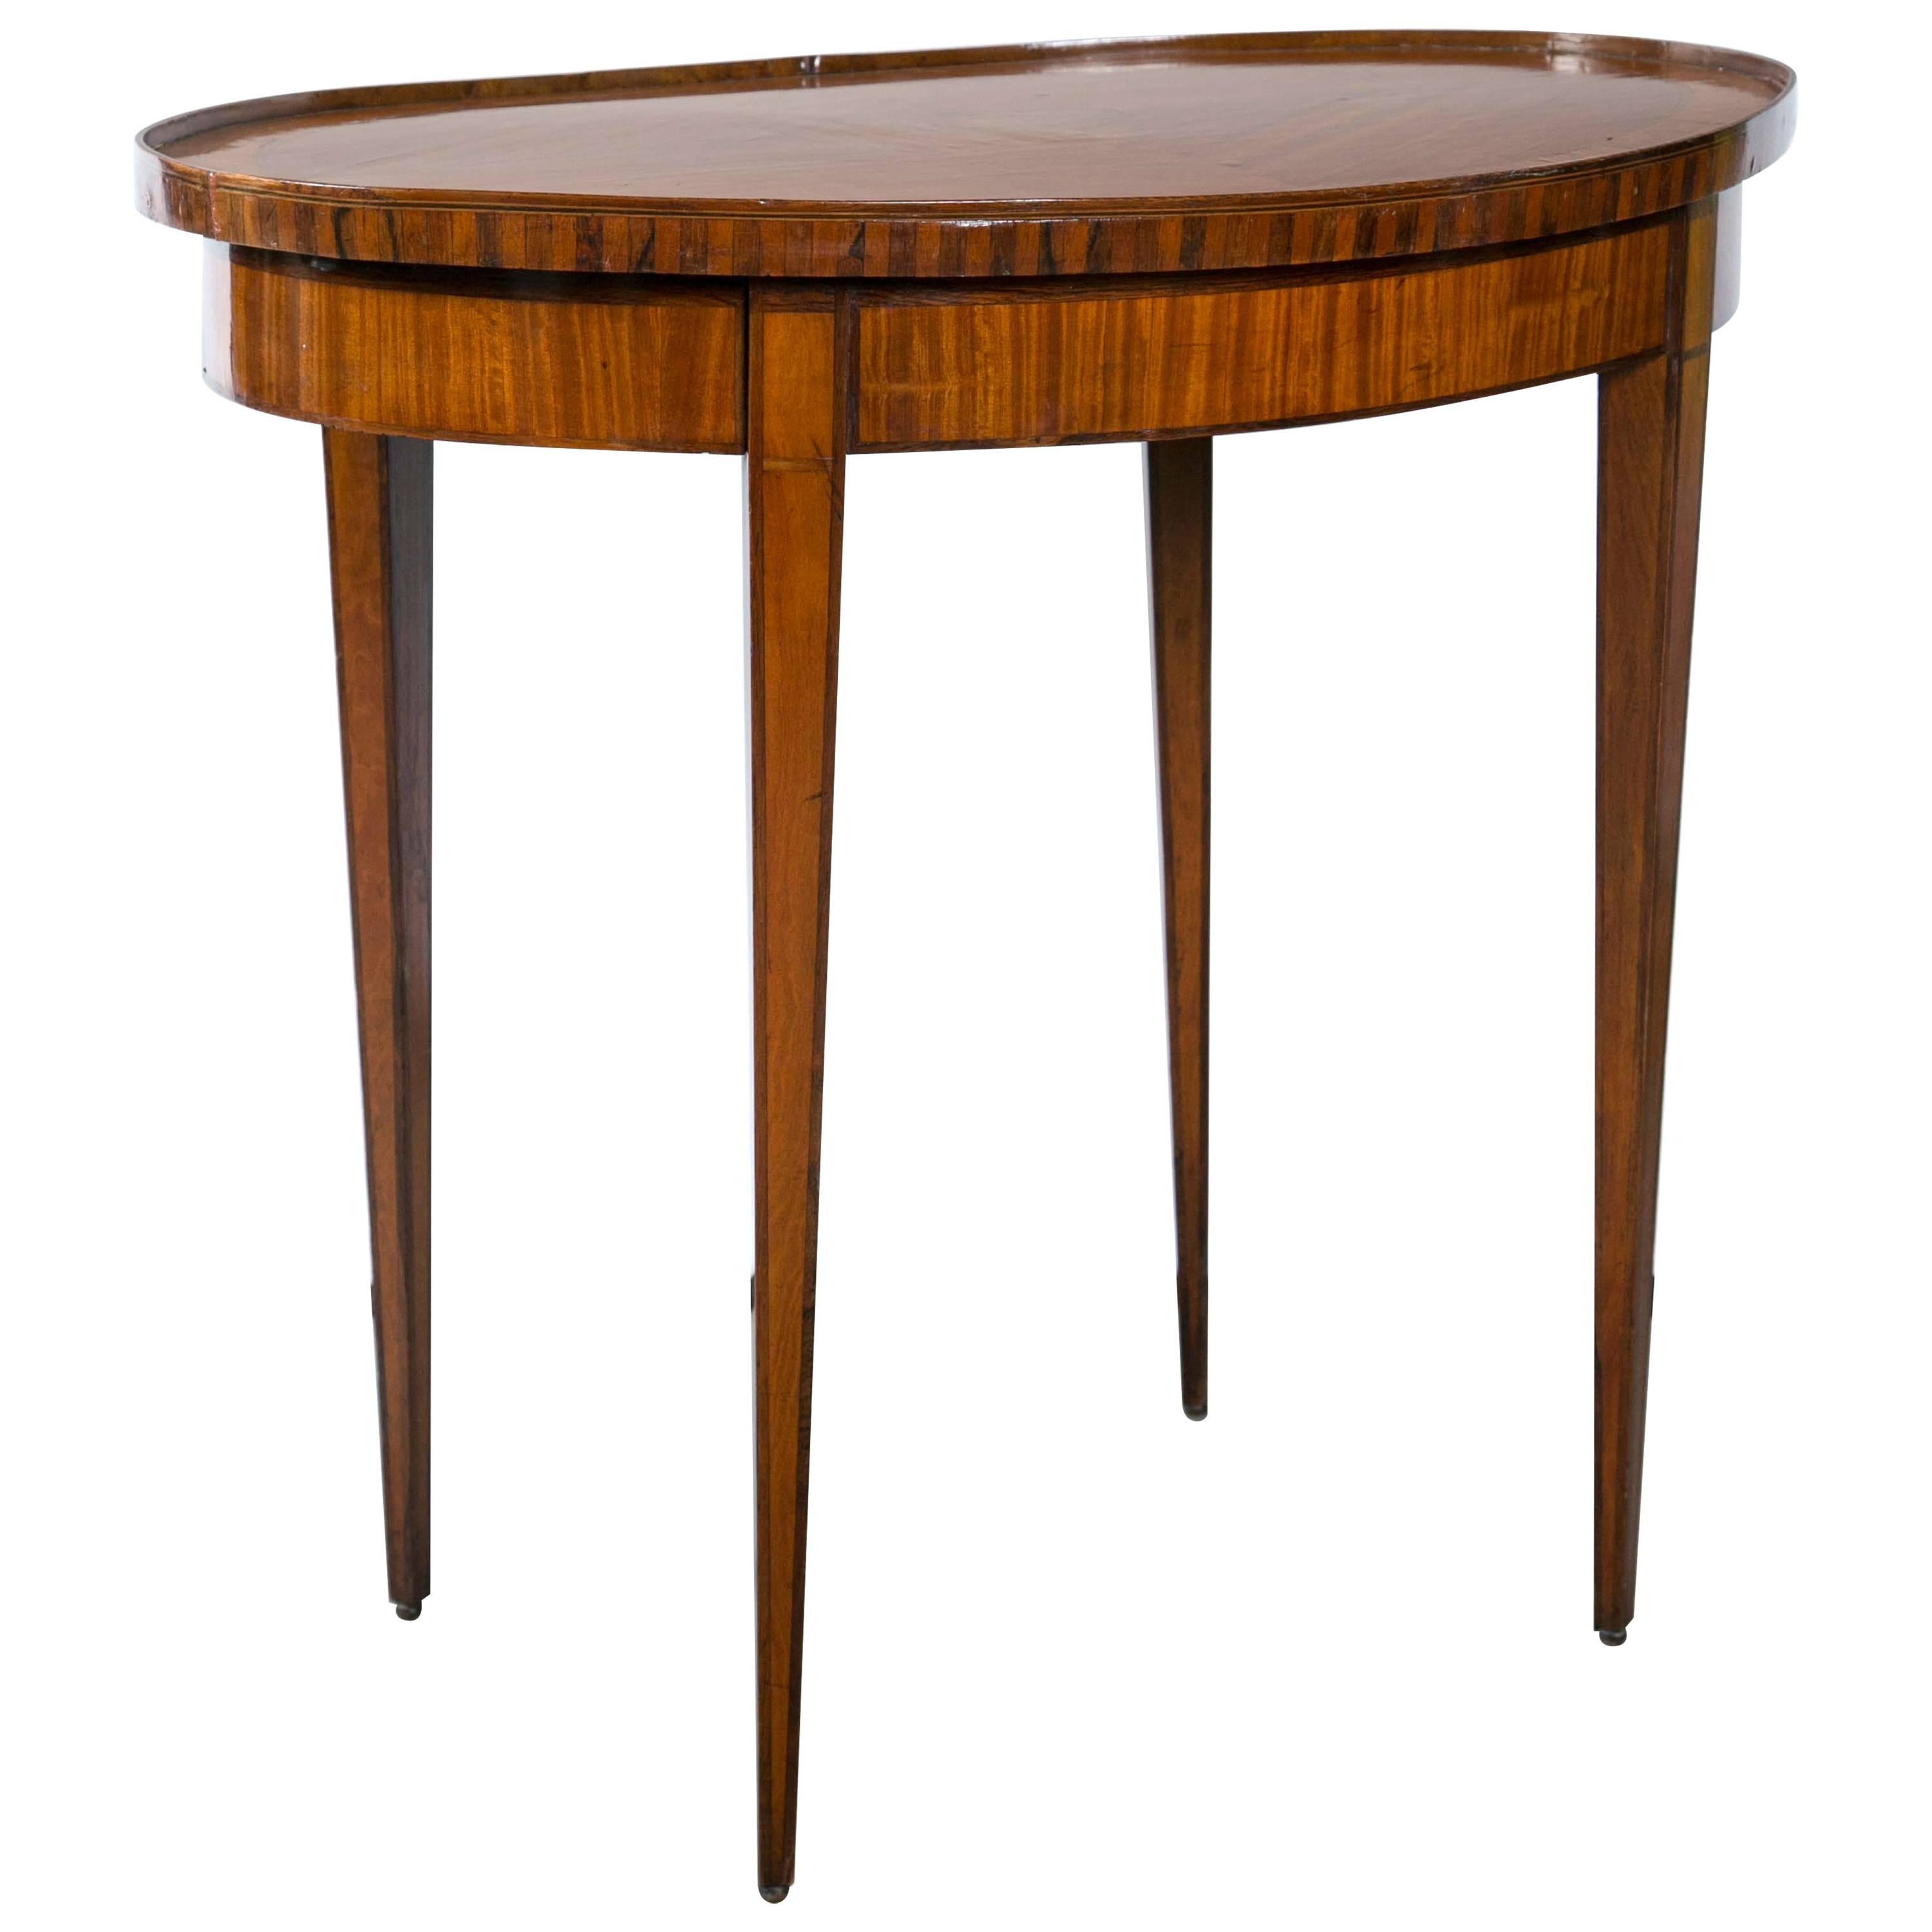 19th Century Adams Style Oval Table For Sale